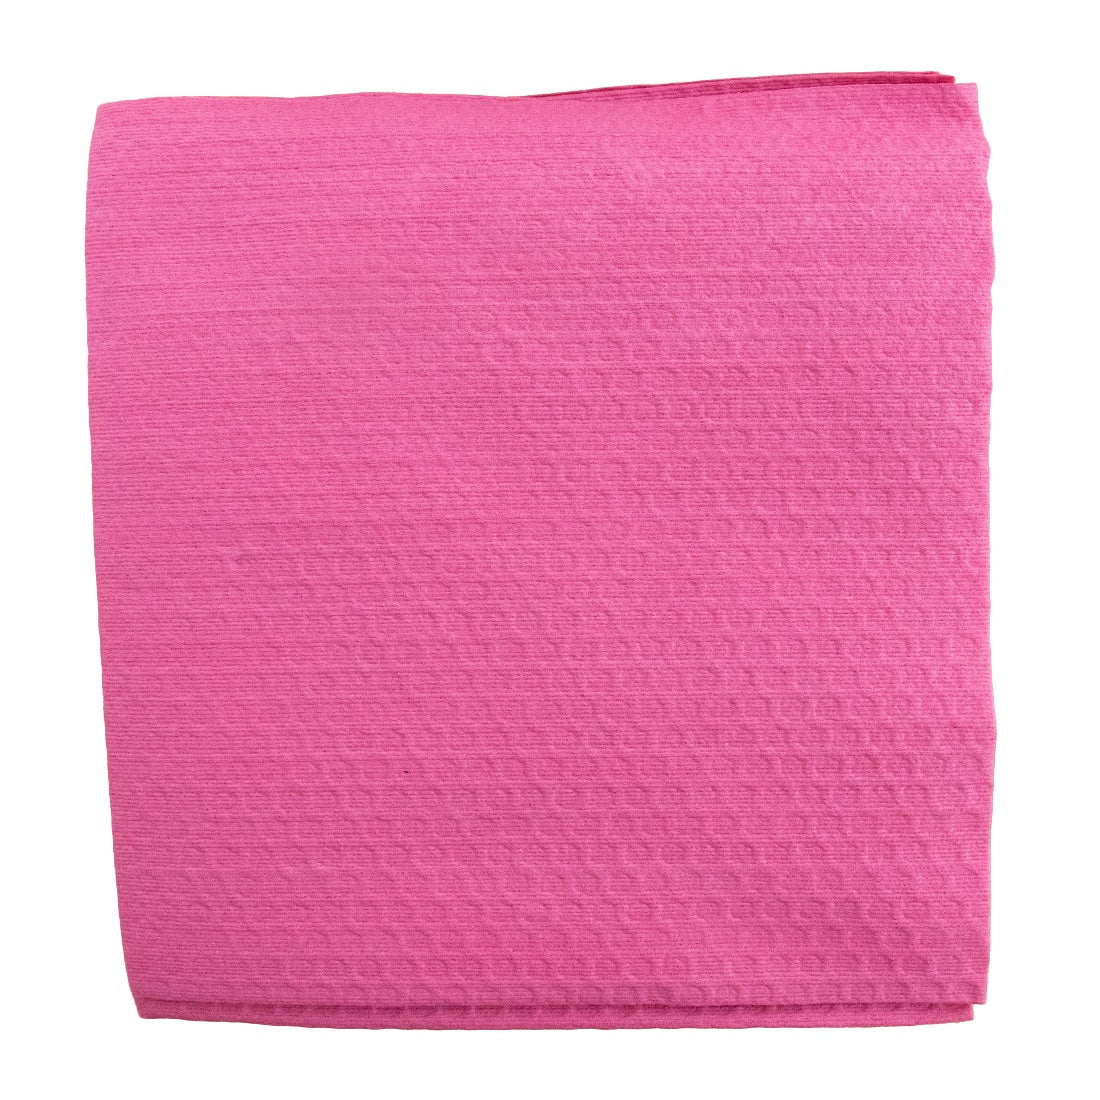 Nanovations Vision Protect Professional Application Kit Towel Front View